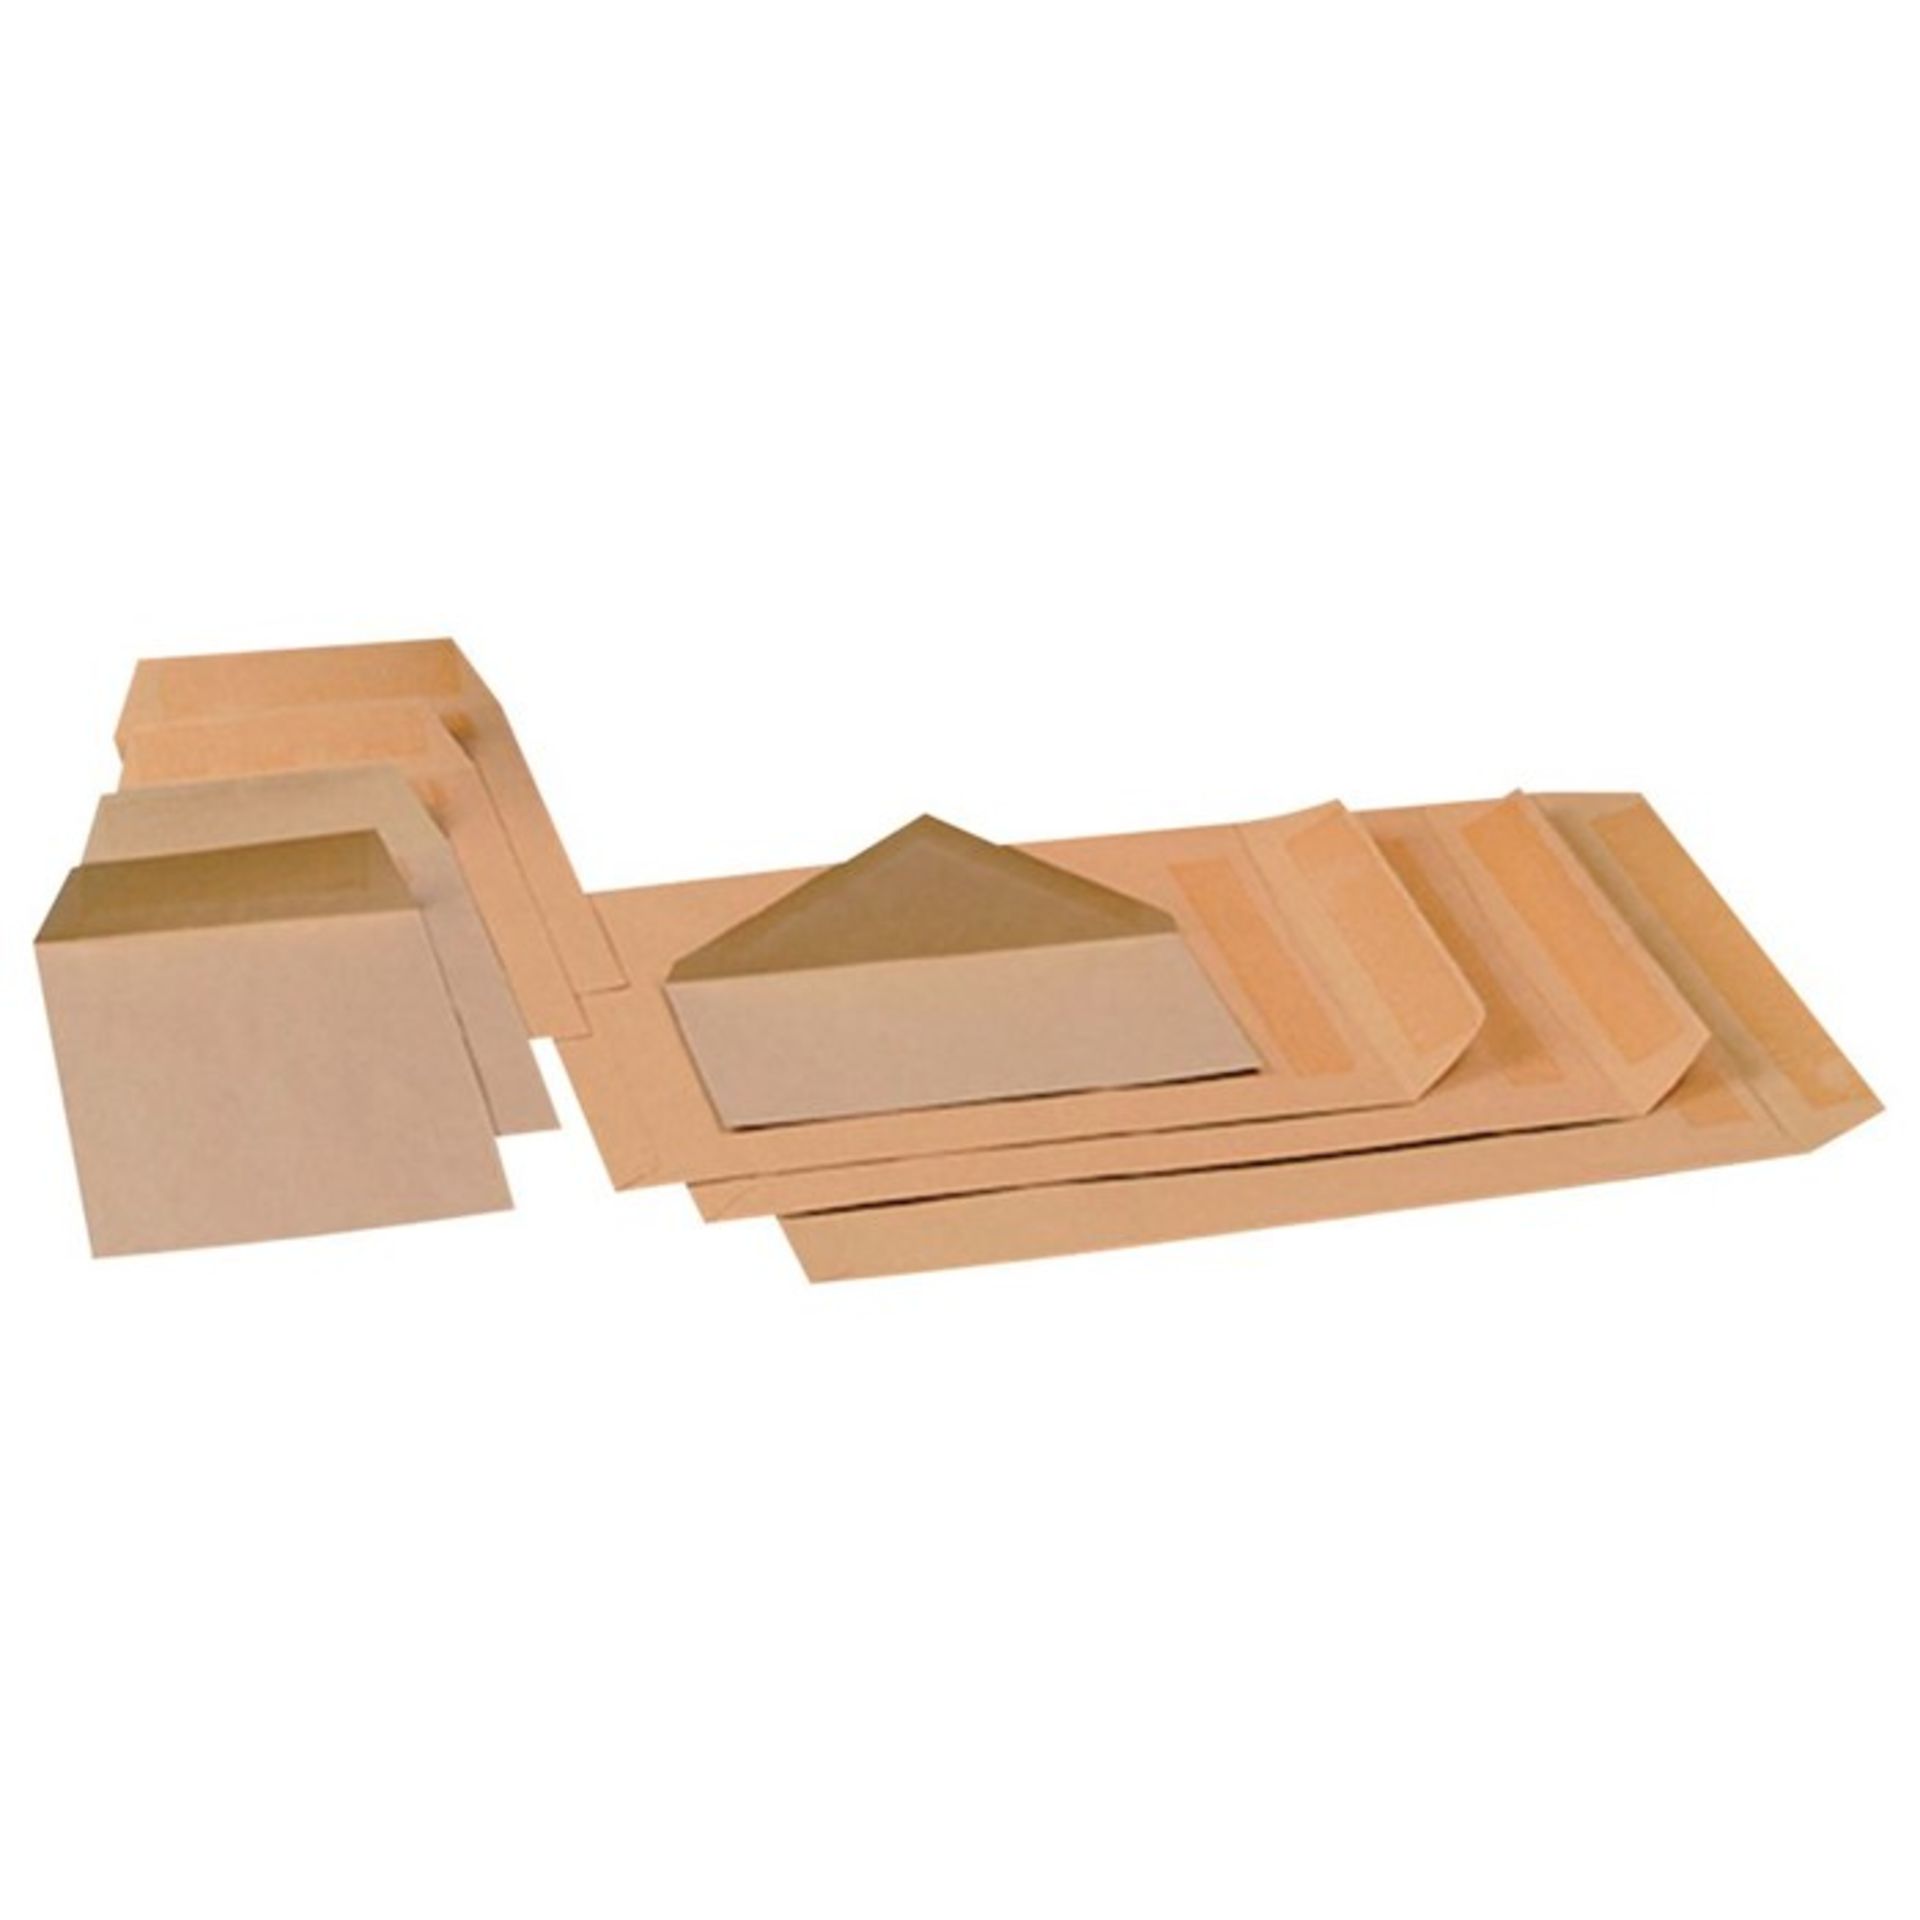 1 LOT TO CONTAIN 4 PACKS OF ENVELOPES 406 X 305MM,